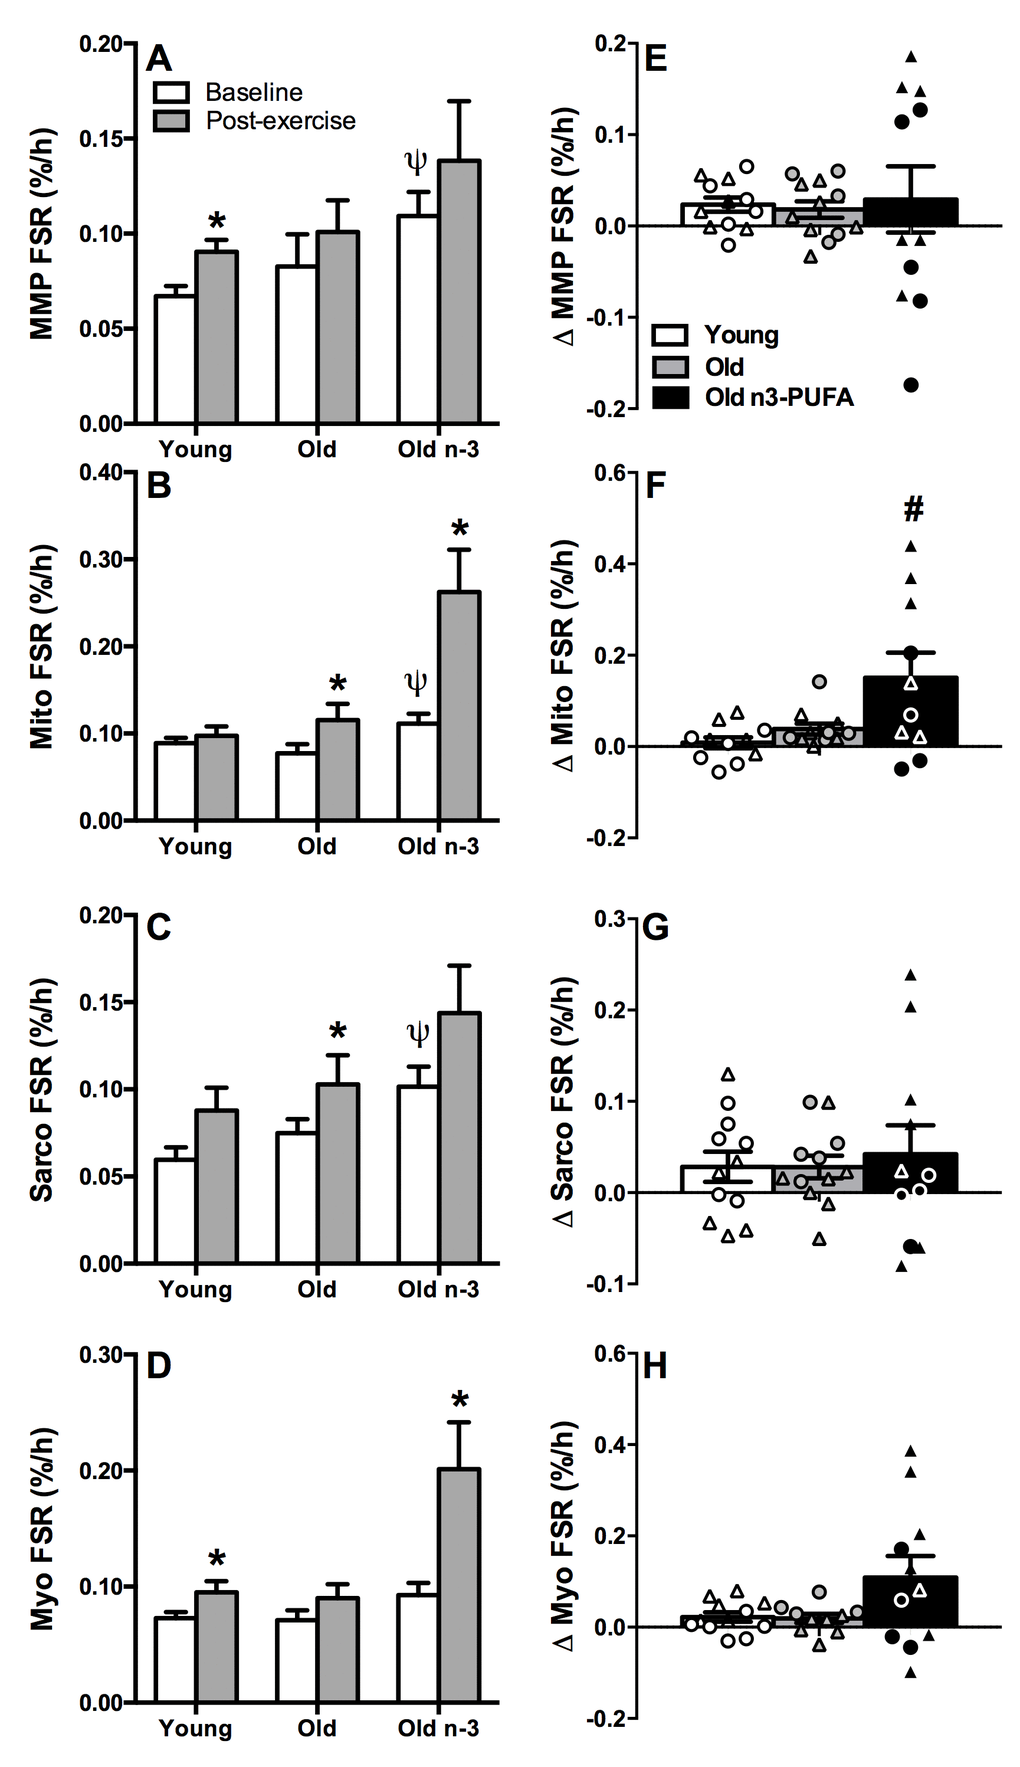 Postabsorptive and exercise-stimulated muscle protein synthesis. Muscle protein synthesis was measured from the rate of incorporation of isotopically labeled amino acid into muscle proteins. Protein synthesis was measured at baseline (postabsorptive) and 15-18 hours following a single bout of exercise for mixed muscle (MMP) (A, E), mitochondrial fraction (Mito) (B, F), sarcoplasmic fraction (Sarco) (C, G), and myofibrillar fraction (Myo) (D, H). Postabsorptive protein synthesis was similar in young and old in all fractions. Mixed muscle and myofibrillar protein synthesis increased with exercise in young but not old. Mitochondrial and sarcoplasmic protein synthesis increased with exercise in old but not young. n3-PUFA supplementation increased mitochondrial and myofibrillar protein synthesis after exercise. The change in FSR (Δ=post exercise-baseline) is shown in the right panel (E-H), illustrating responders and non-responders. * Significantly (p≤0.05) different from corresponding baseline value. Ψ Significantly different from corresponding pre-intervention value. # Significantly different from young. Data bars are mean ± SEM. Circles denote men and triangles denote women.